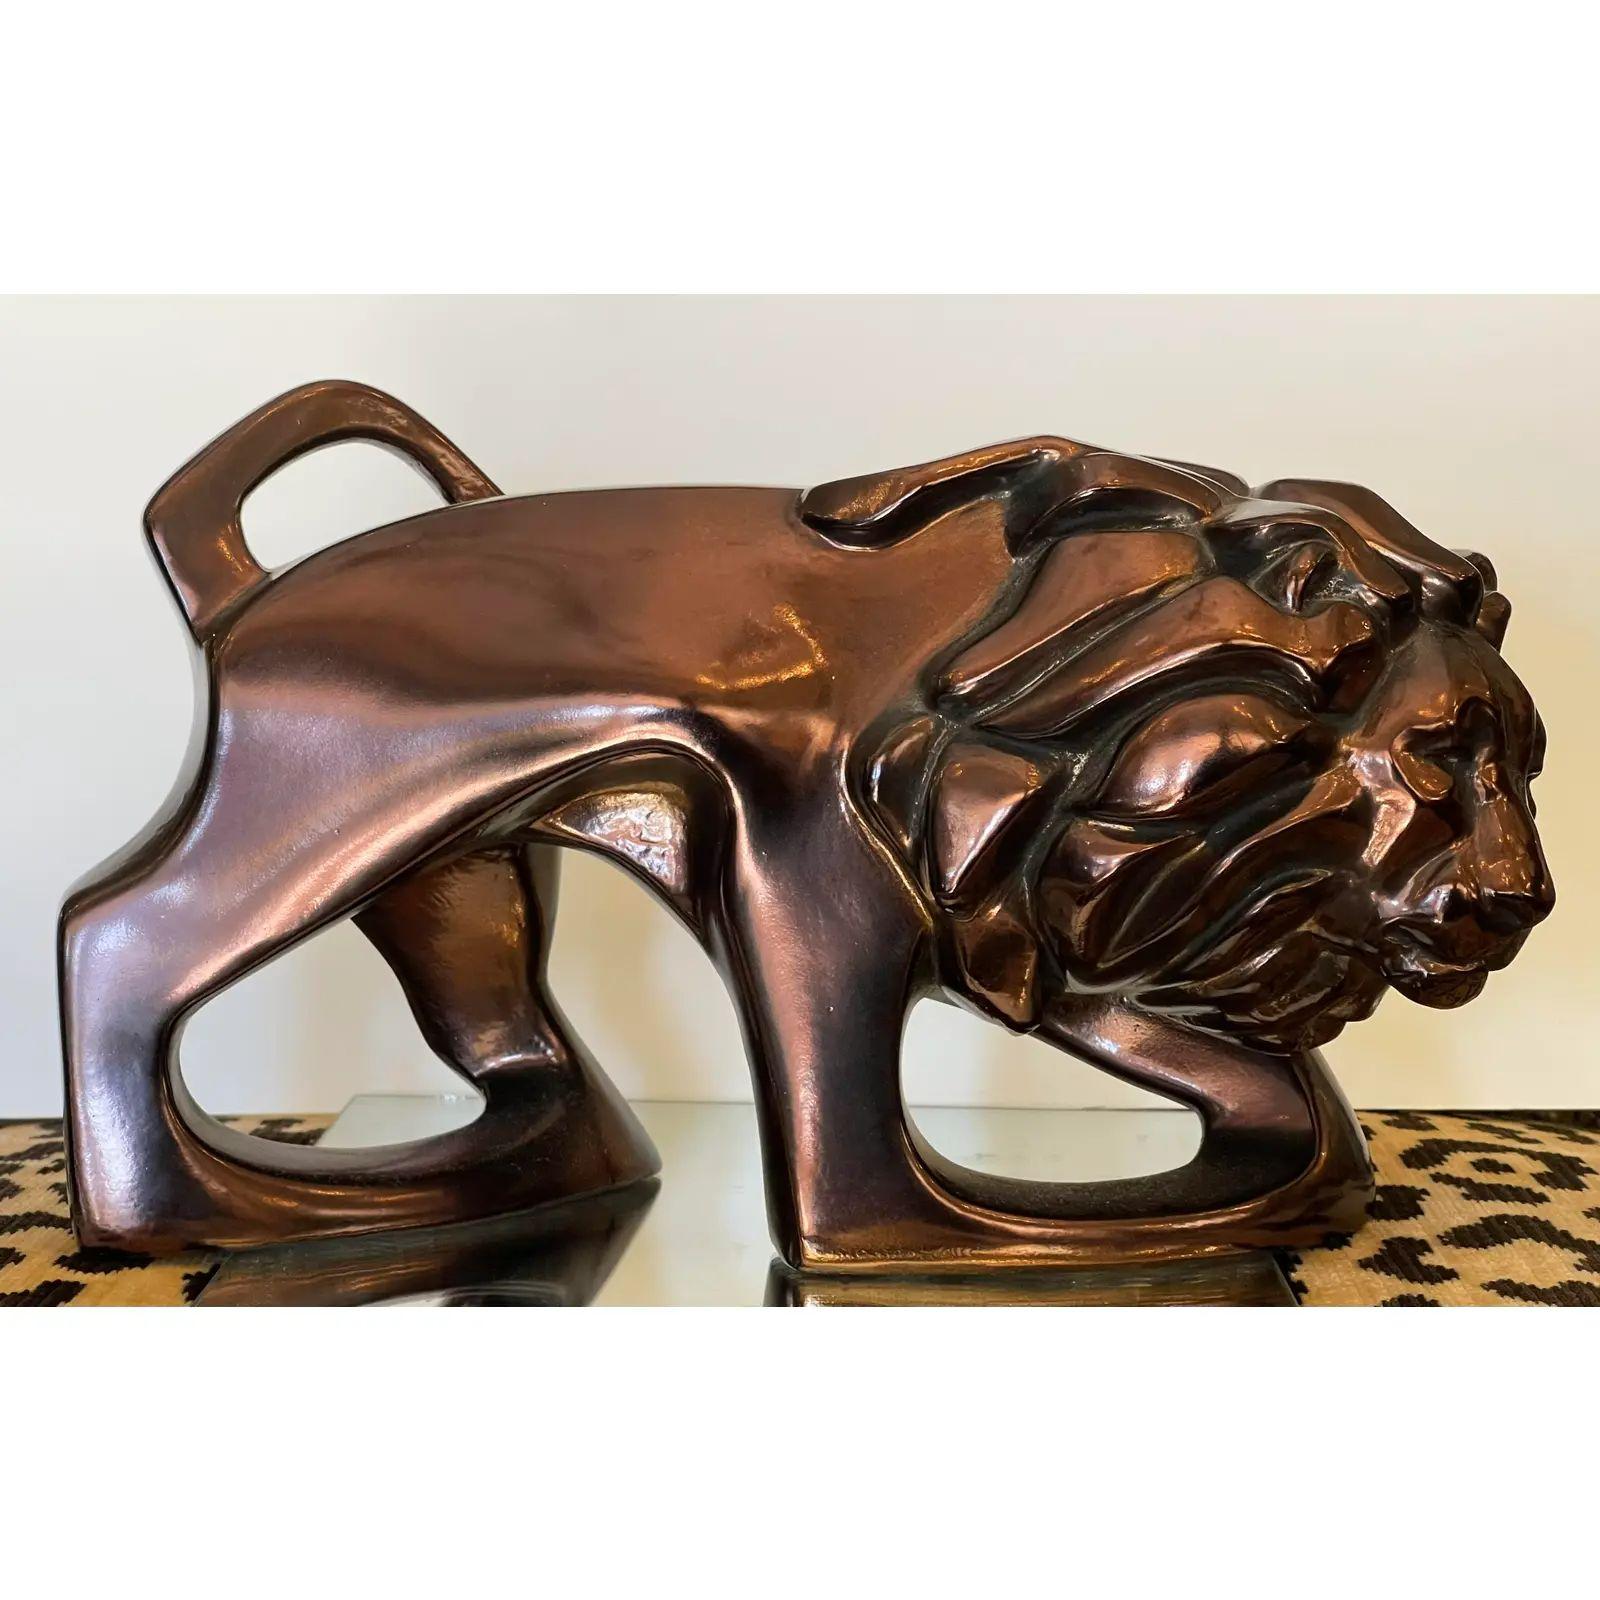 Art Deco Style Carl Schultz Luster pottery lion sculpture. It has a unique modernist in luster pottery. It is artist signed C. Schultz and dated 1979.

Additional information: 
Materials: Pottery
Color: Brown
Period: 1970s
Art Subjects: